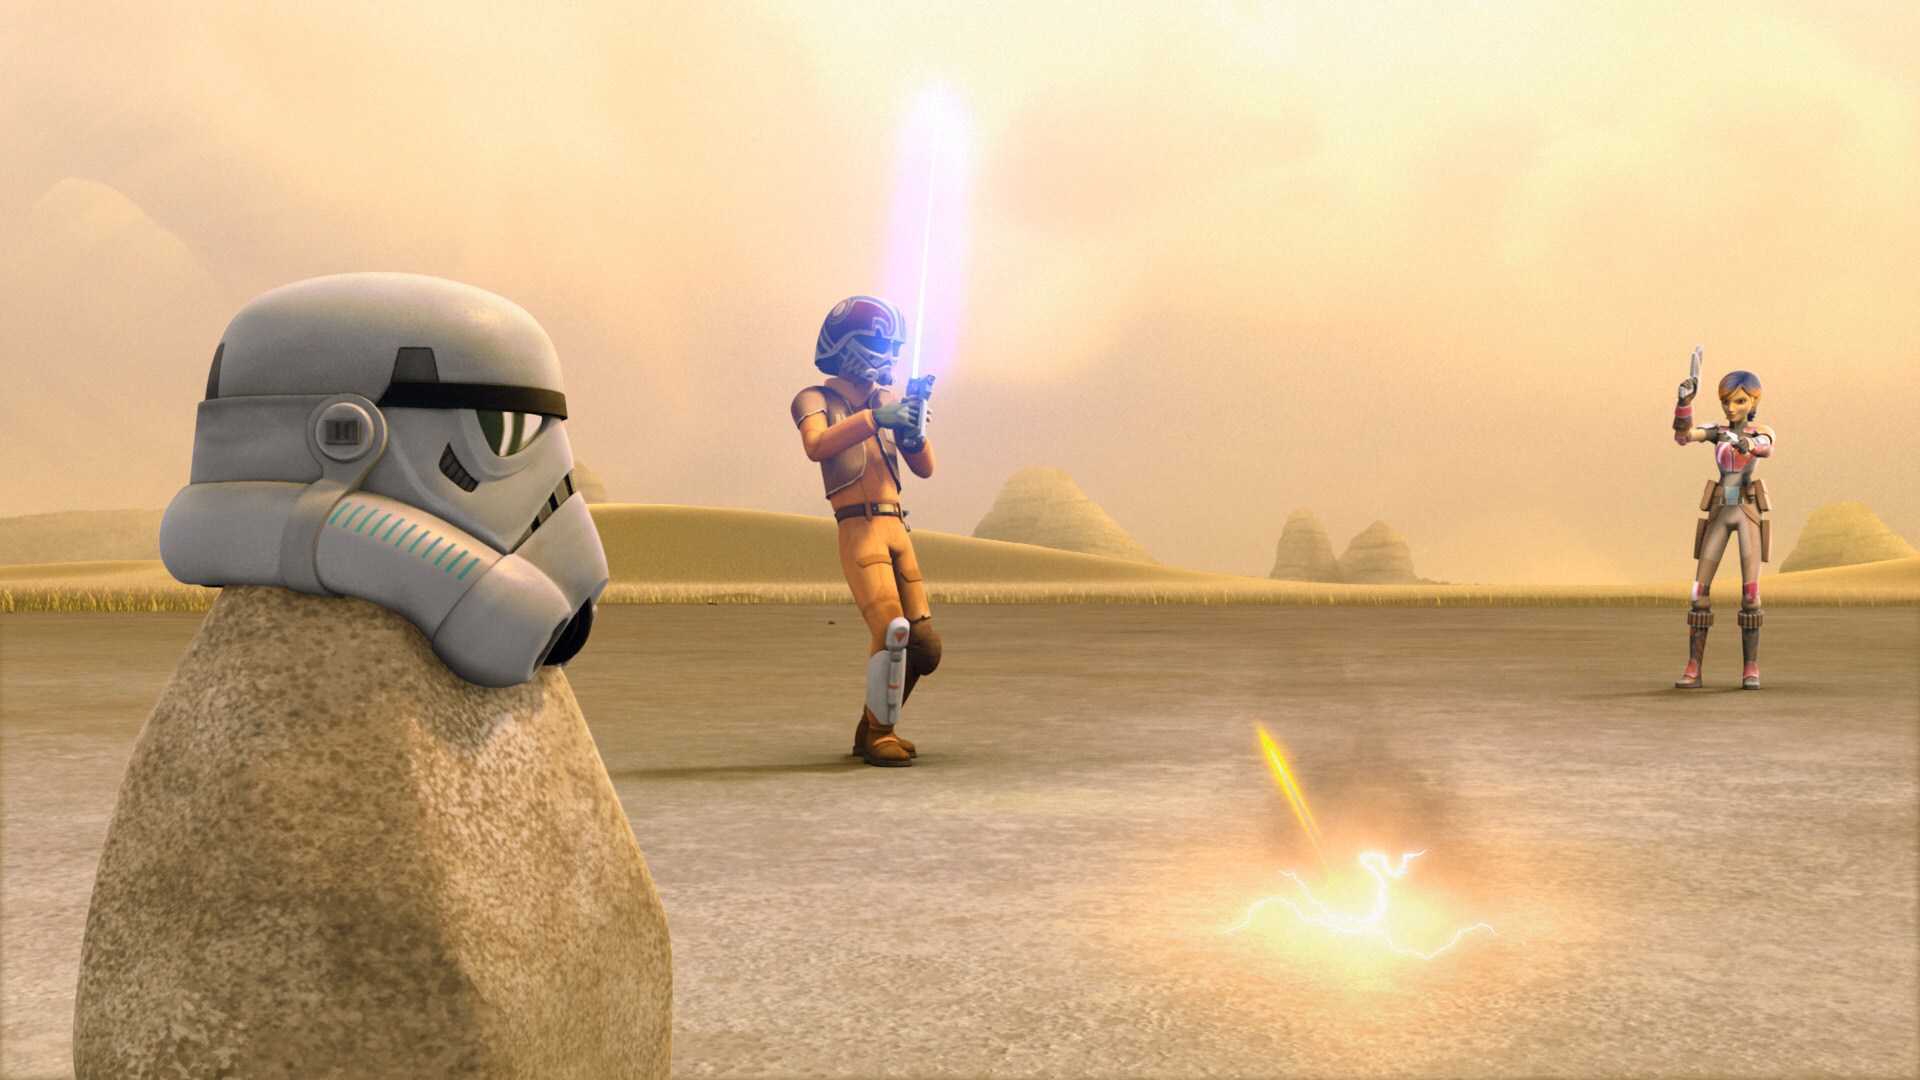 In outskirts of of Lothal, Ezra practices deflecting blasts with his lightsaber. Sabine, Chopper,...